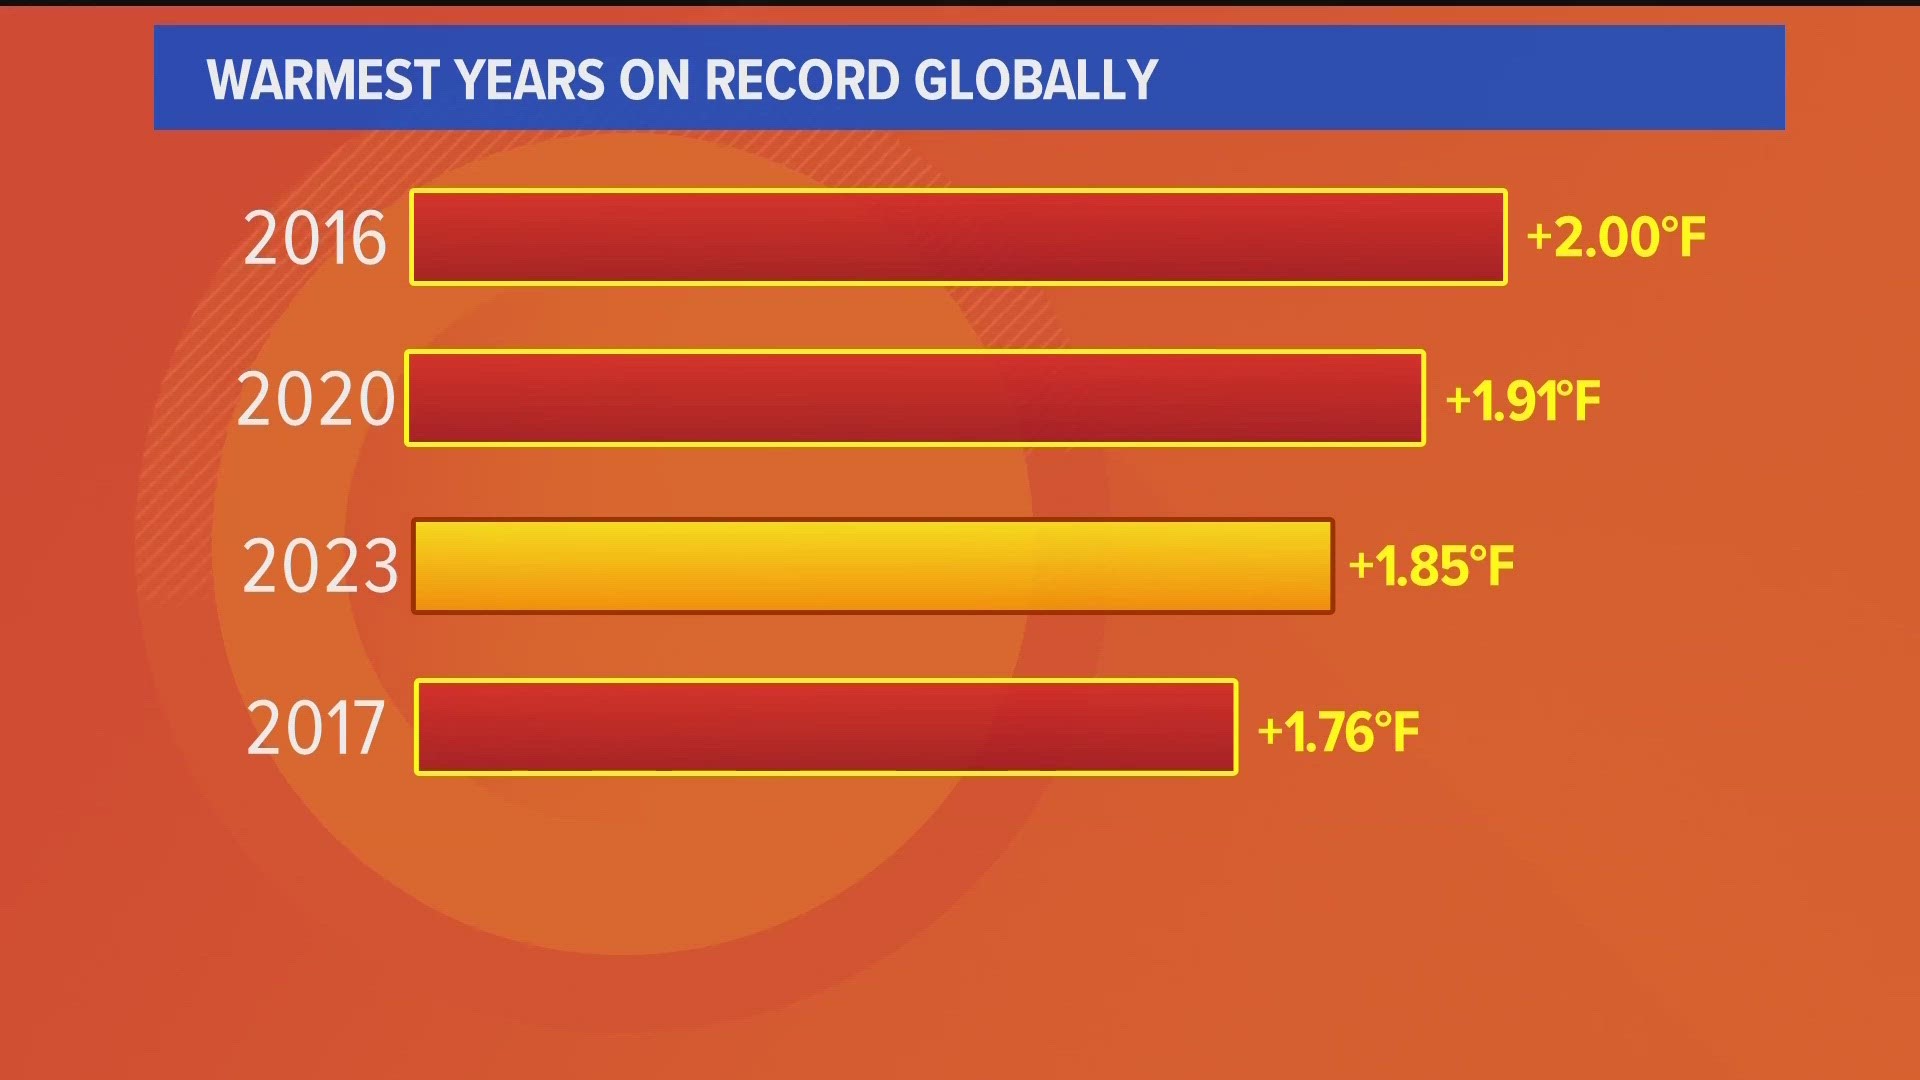 2023 is on track to be one of the warmest years on record.